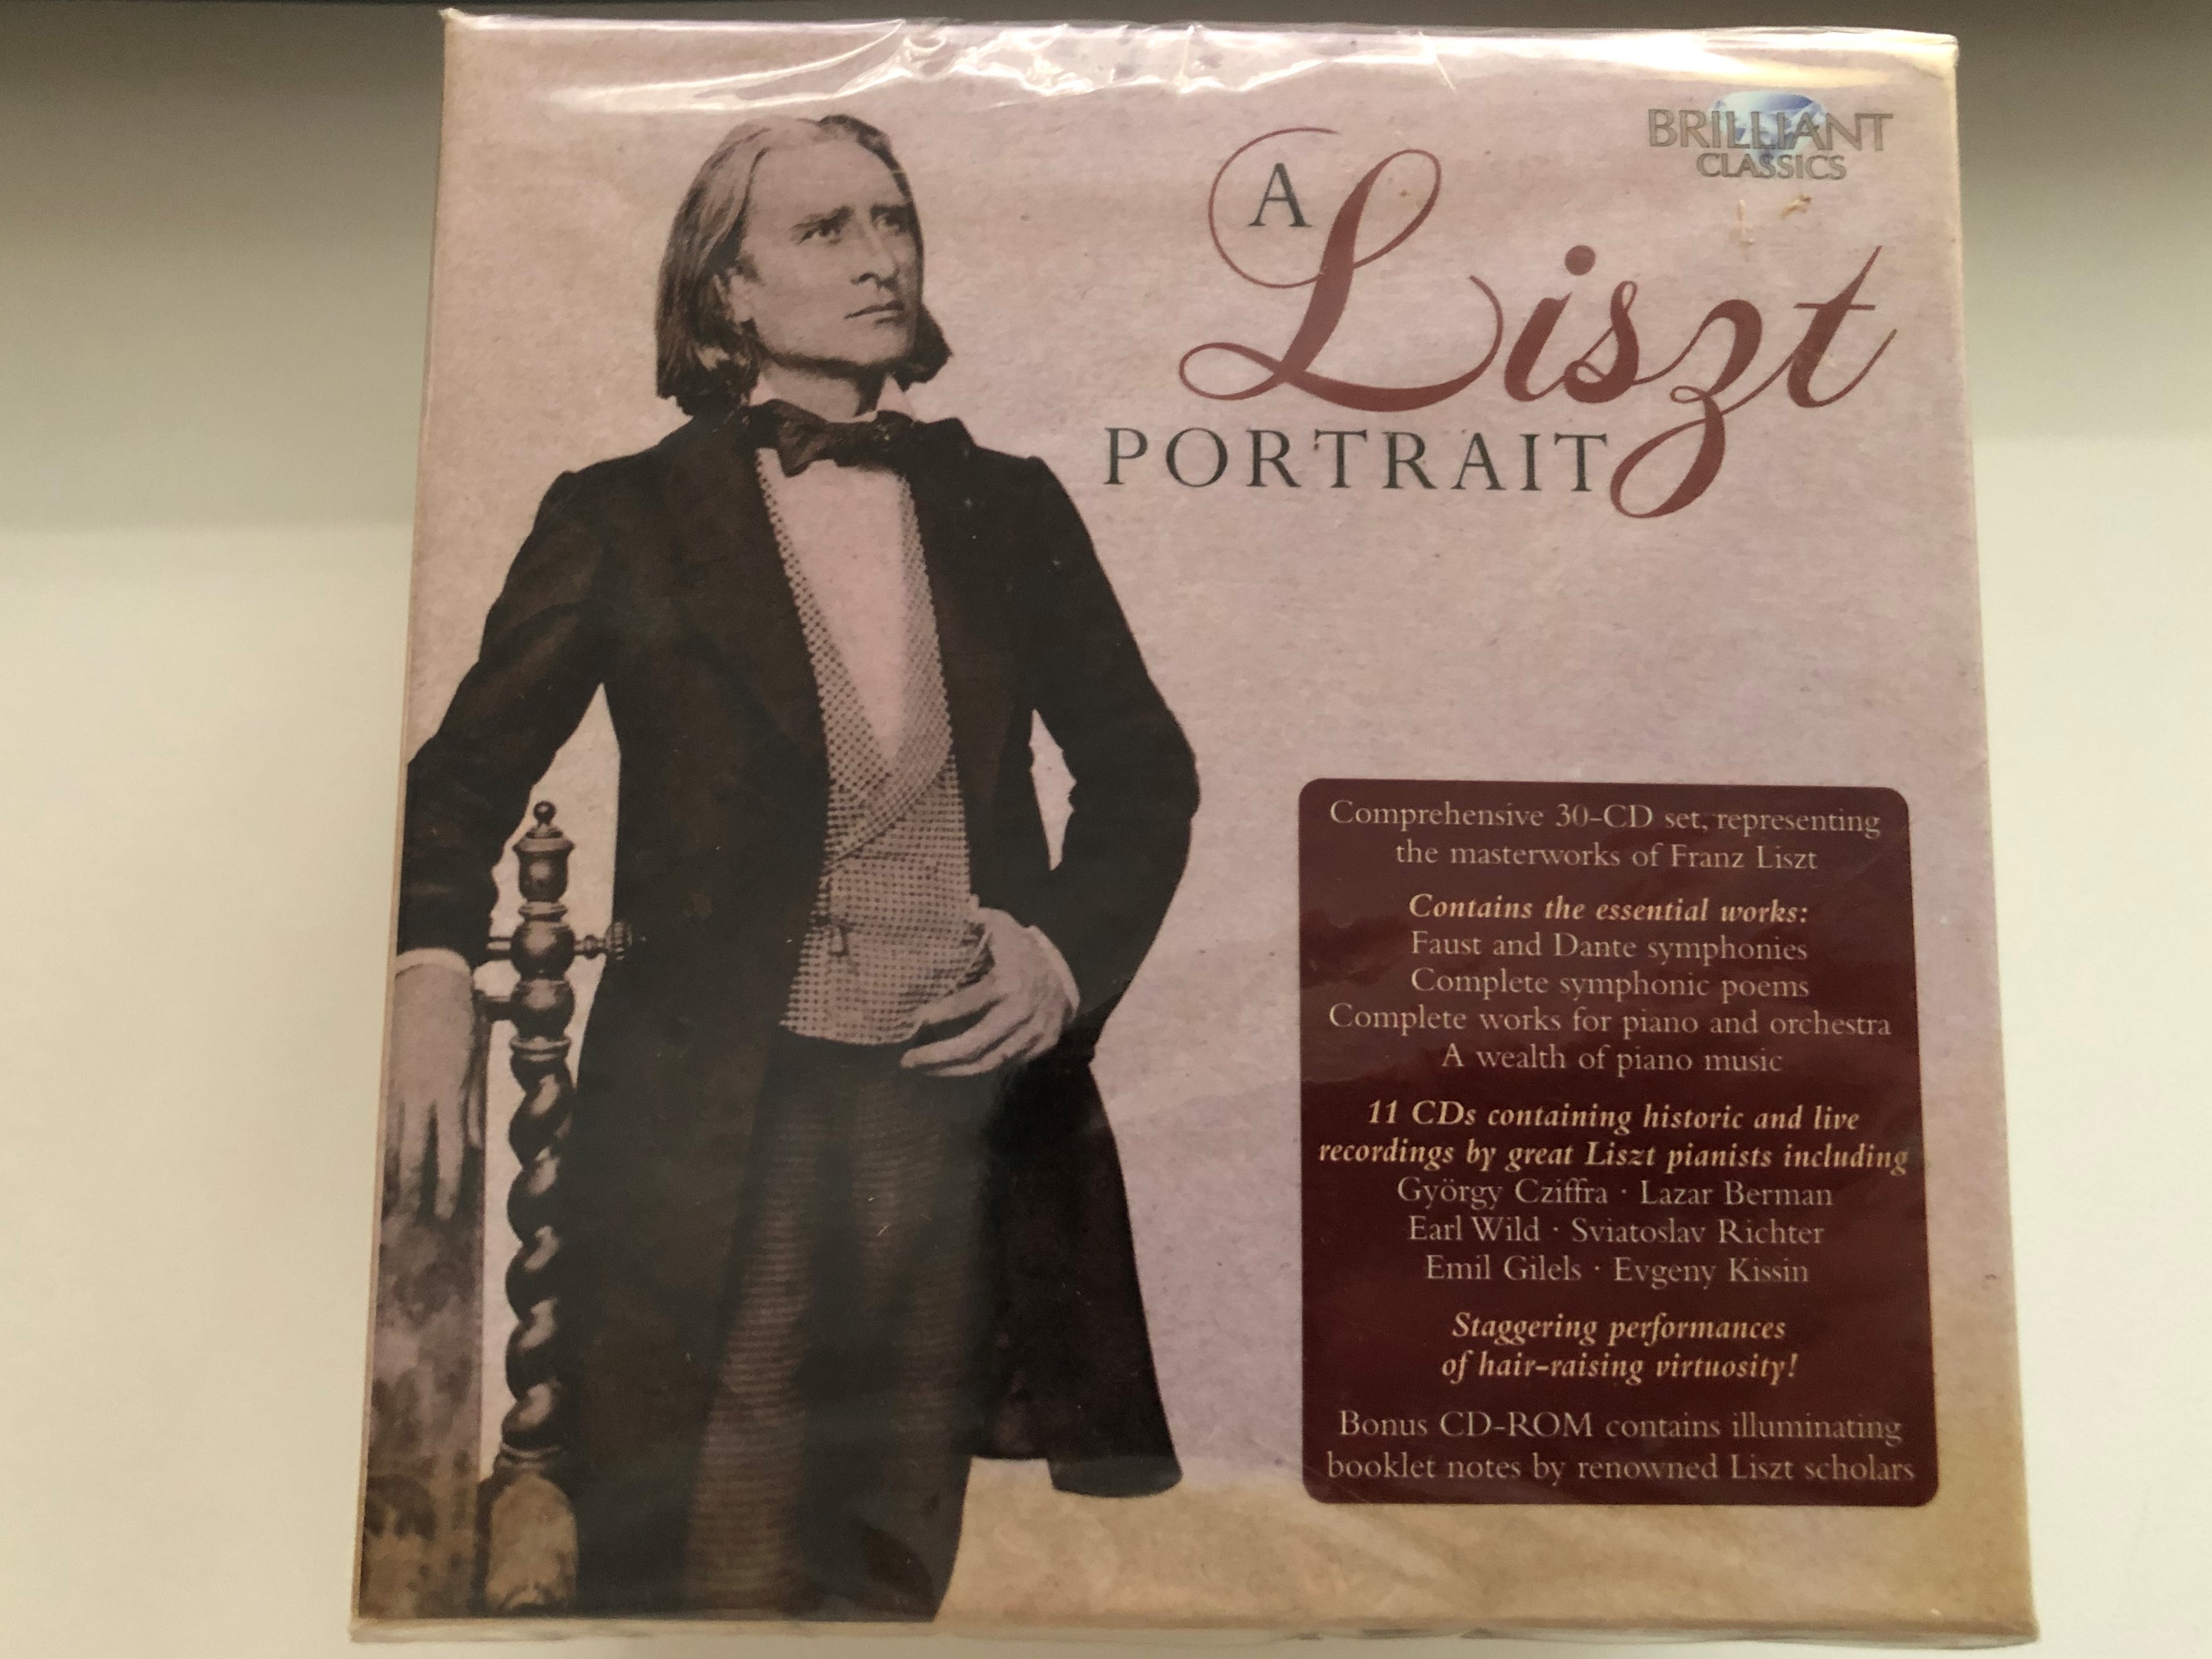 a-liszt-portrait-contains-the-essential-works-faust-and-dante-symphonies-complete-symphonic-poems-complete-works-for-piano-and-orchestra-a-wealth-of-piano-music-brilliant-classics-30x-aud-1-.jpg